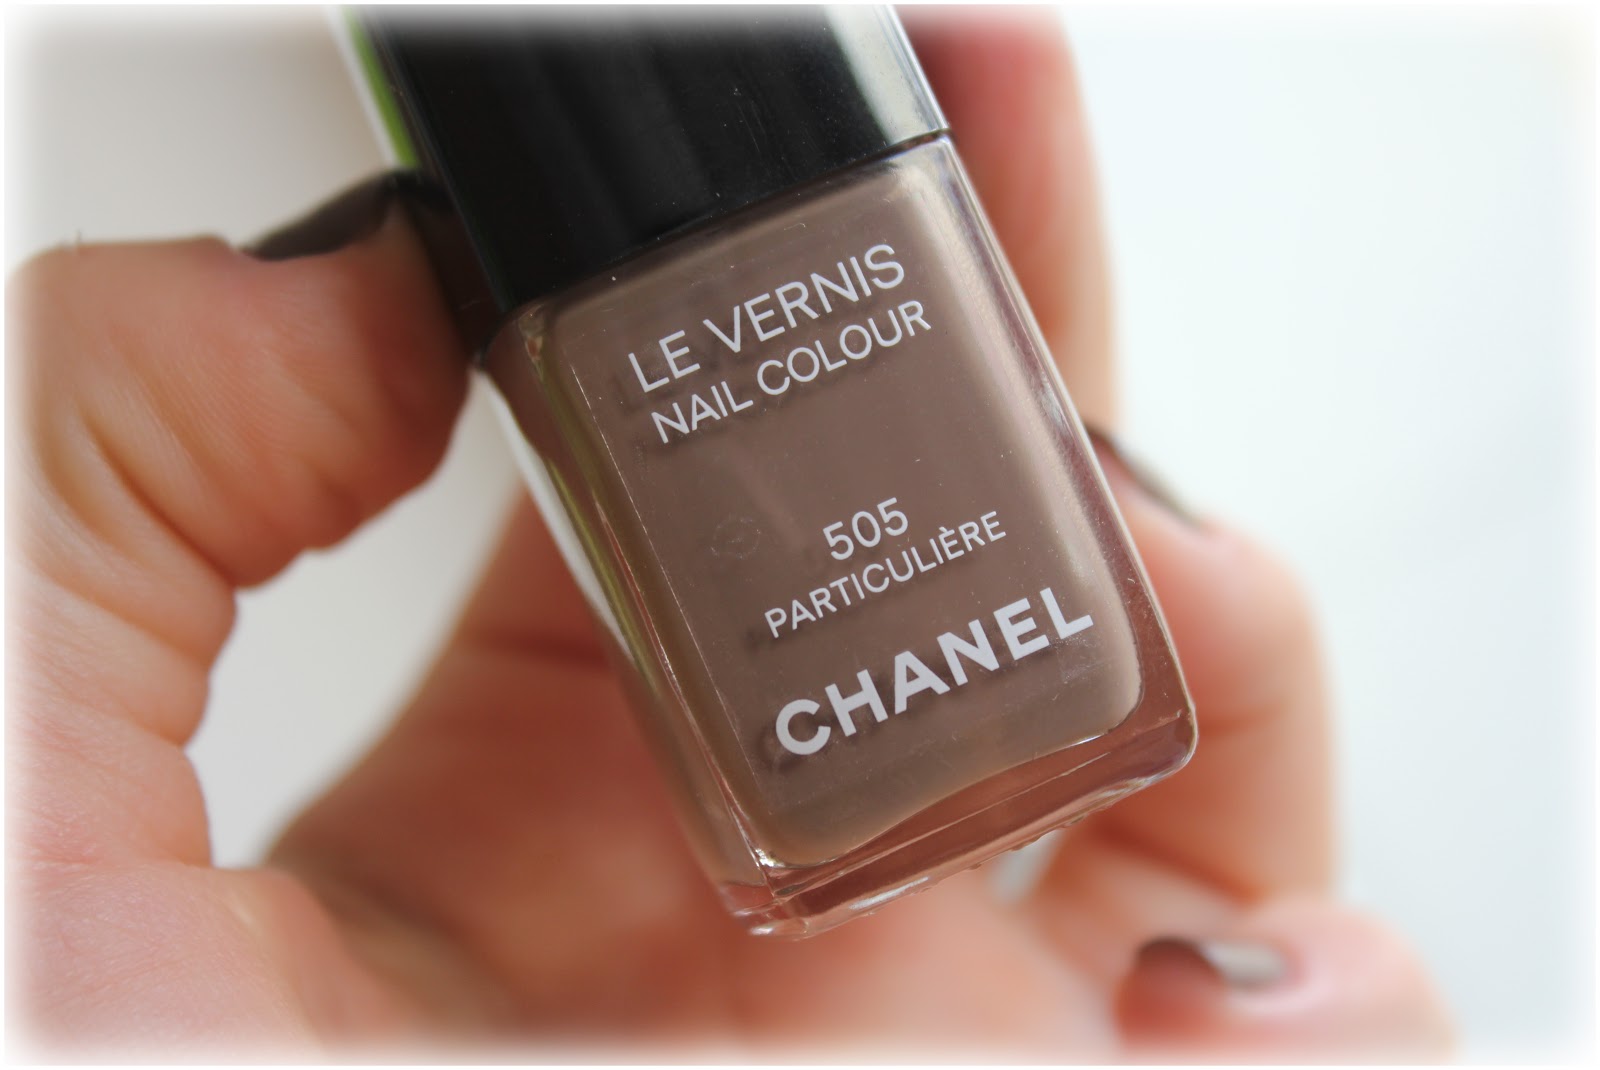 Chanel Le Vernis Longwear Nail Colour in Particuliere - wide 2